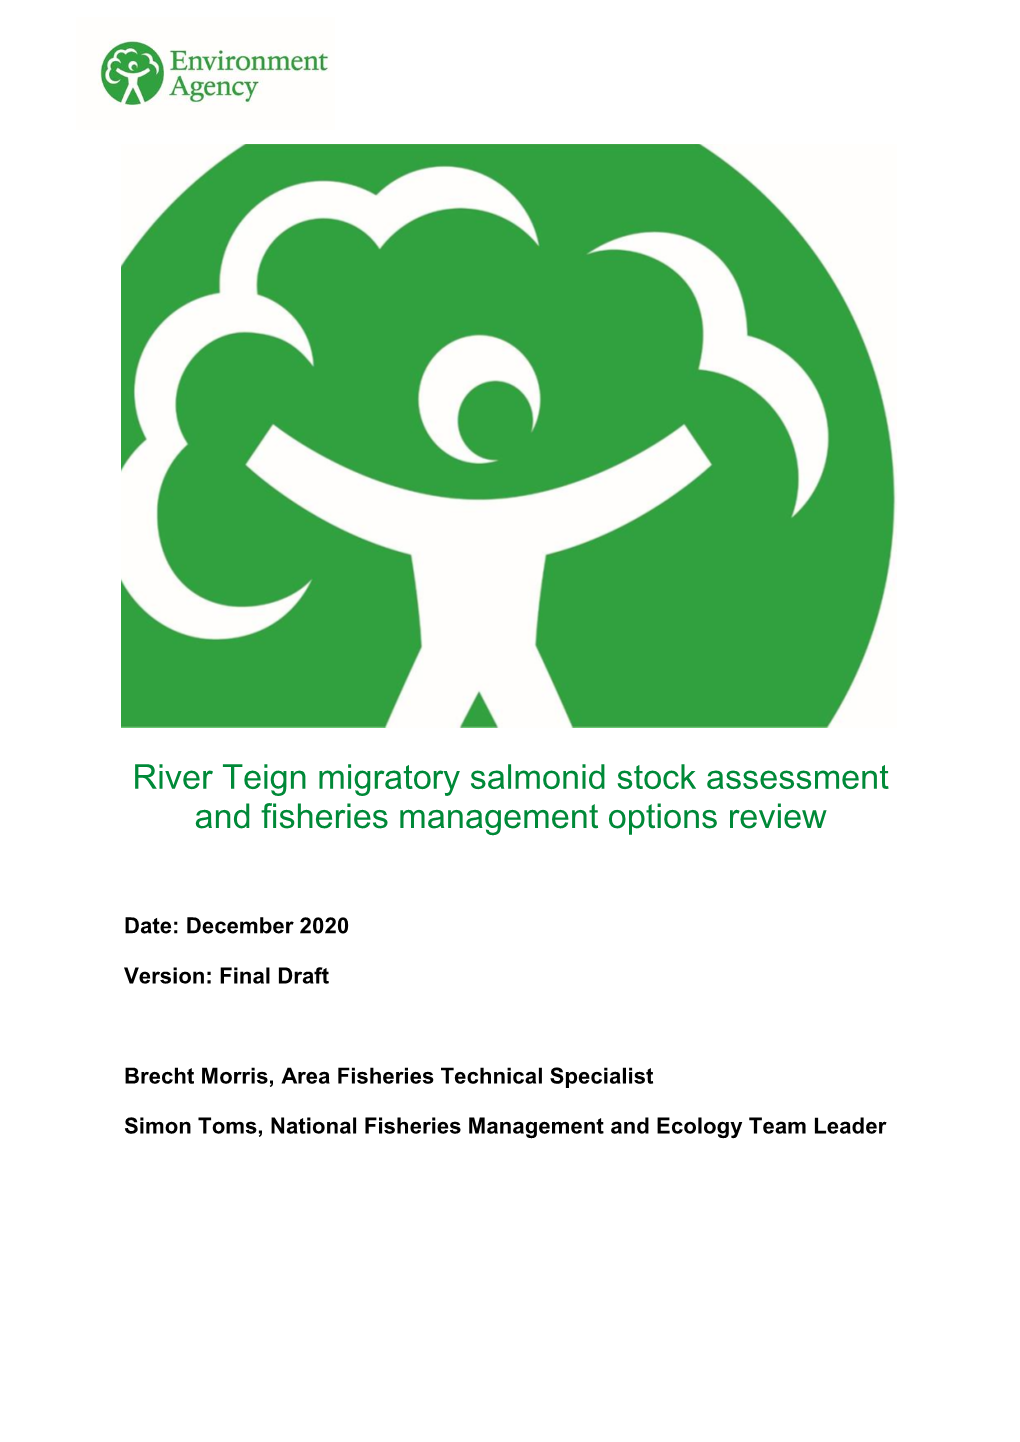 River Teign Migratory Salmonid Stock Assessment and Fisheries Management Options Review